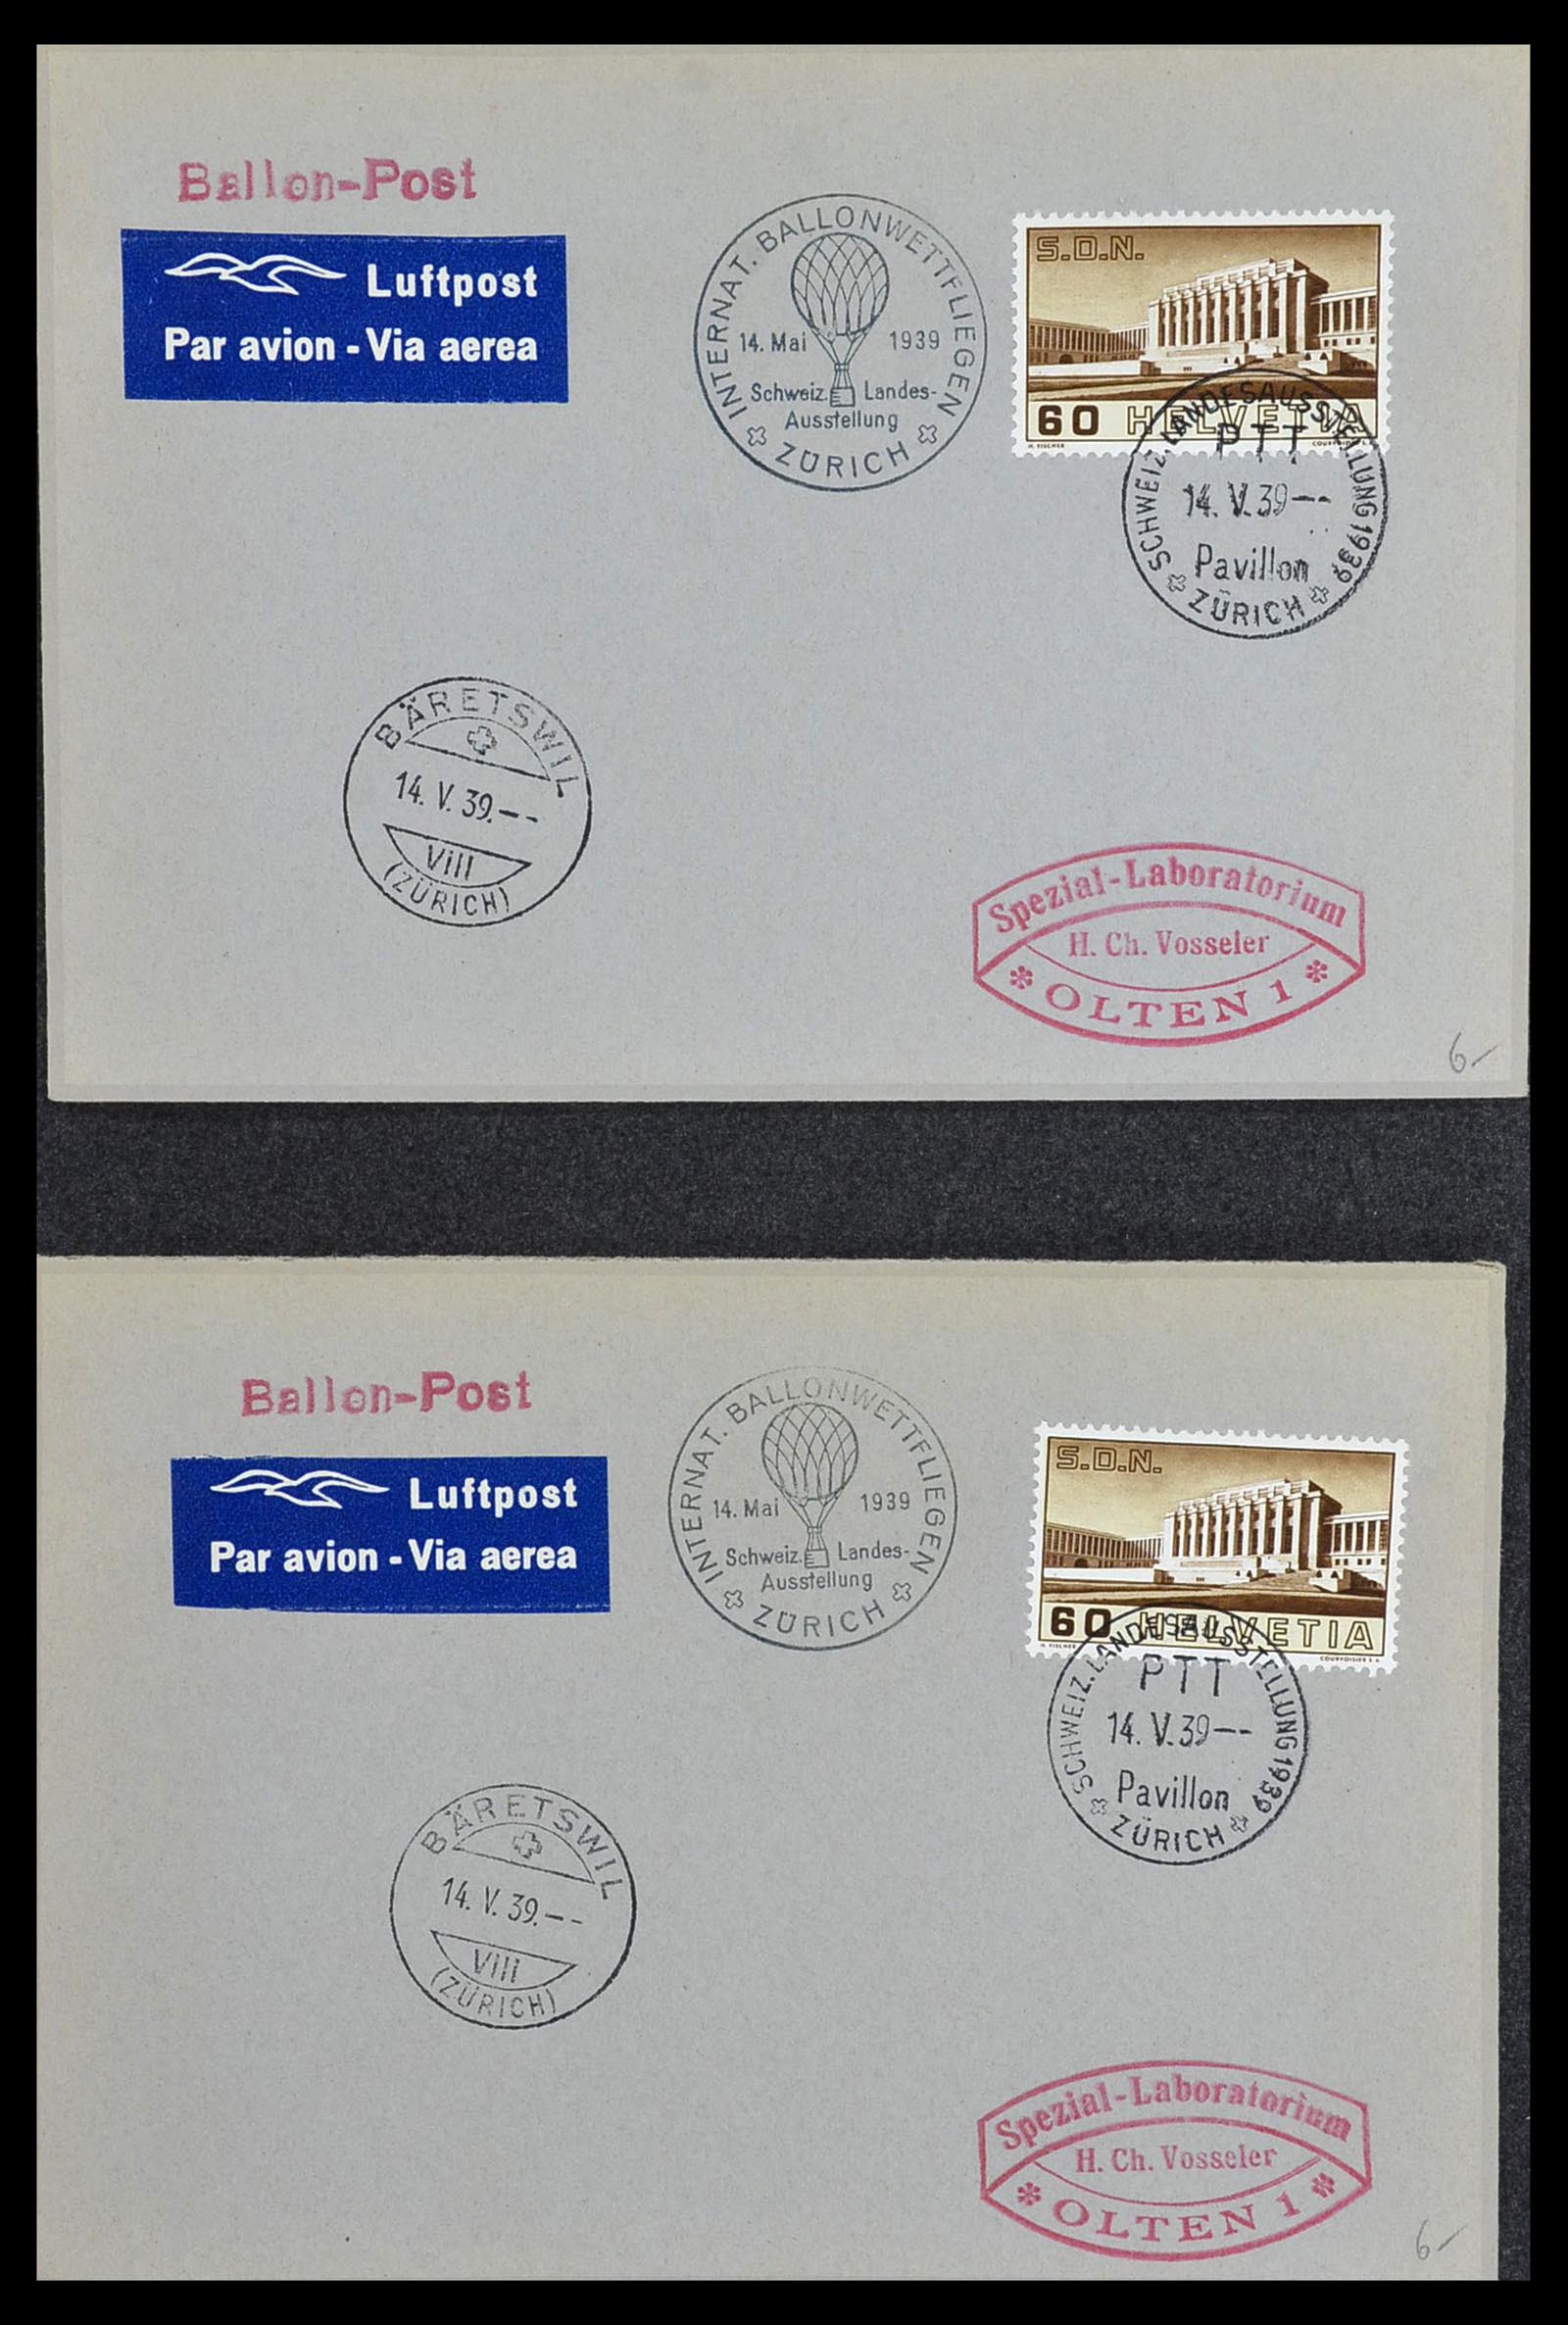 34141 092 - Stamp collection 34141 Switzerland airmail covers 1920-1960.